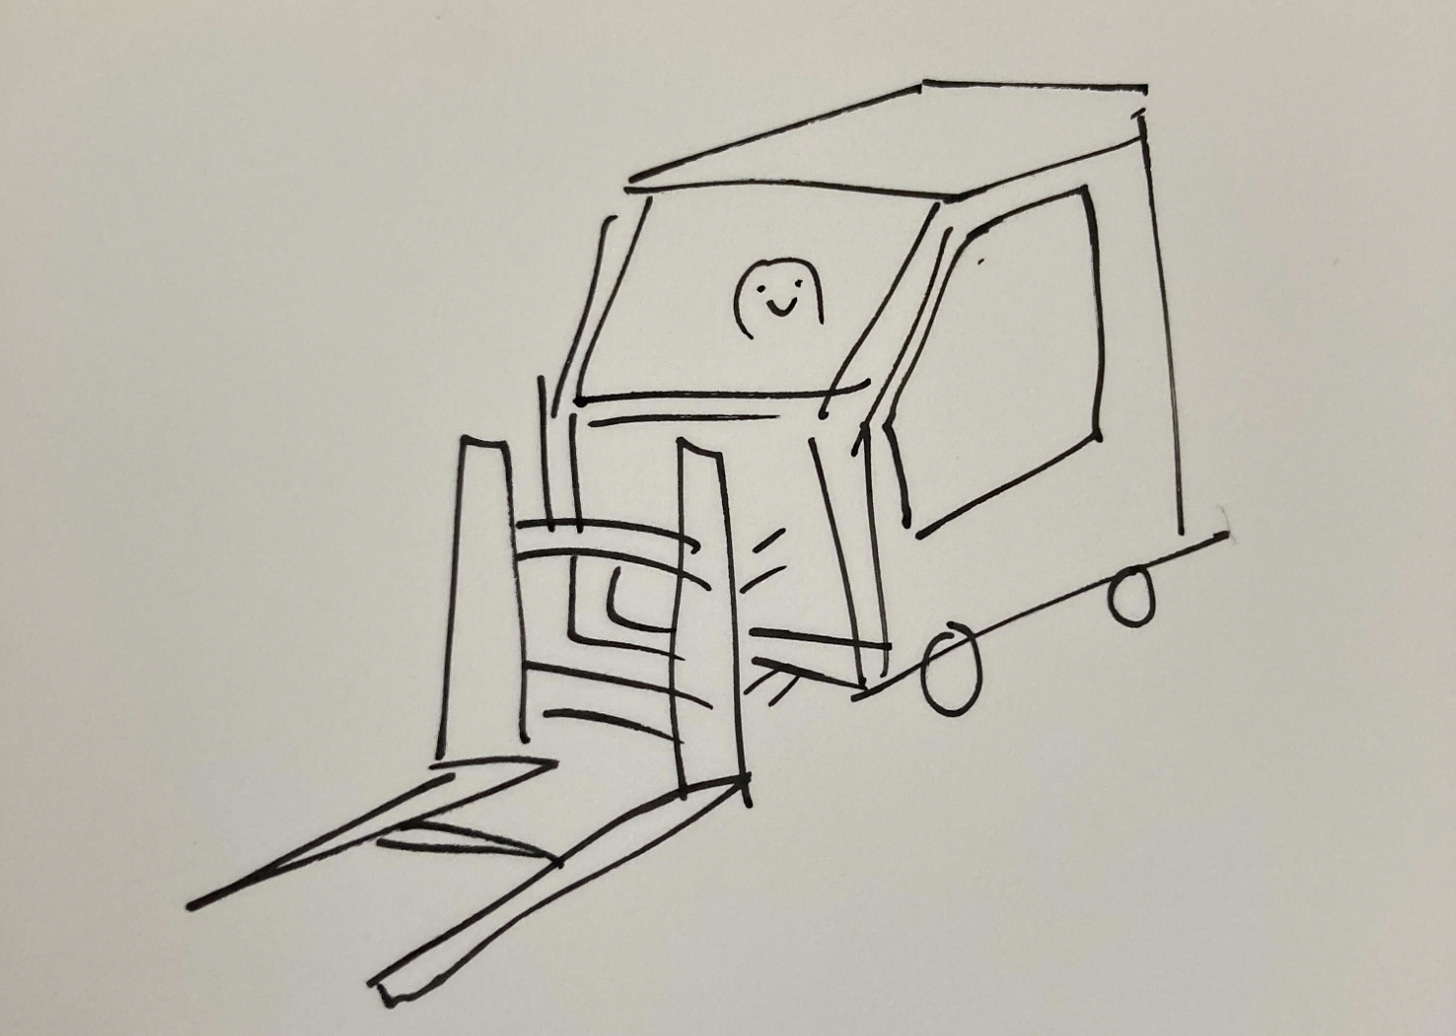 A surprisingly accurate sketch of a forklift